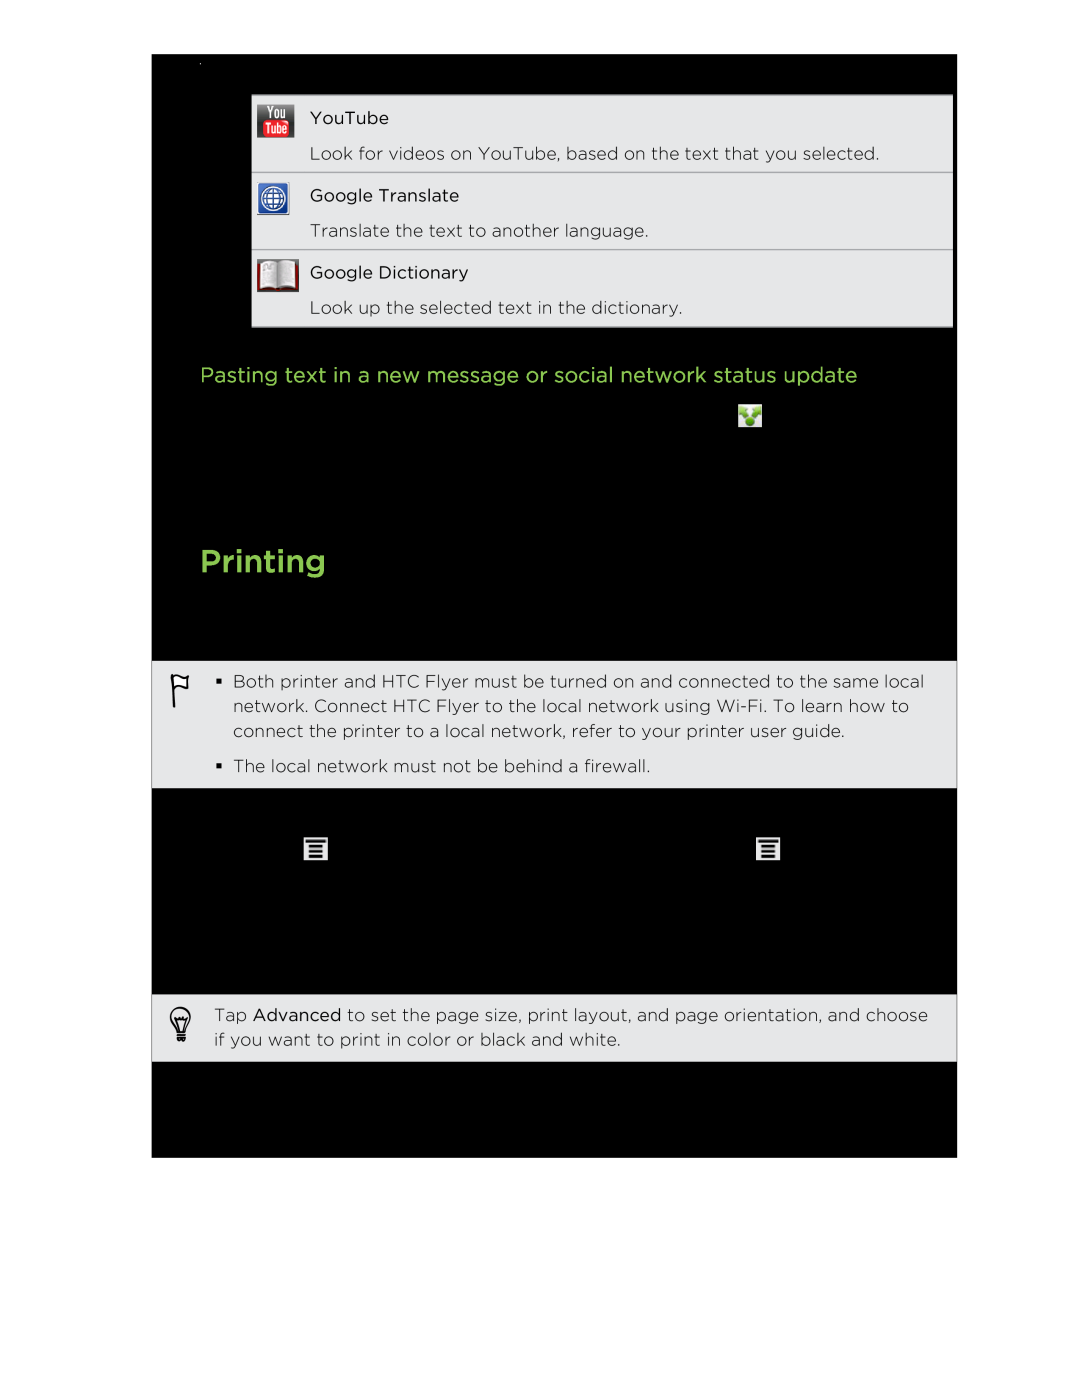 HTC HTCFlyerP512 manual Printing, Pasting text in a new message or social network status update 